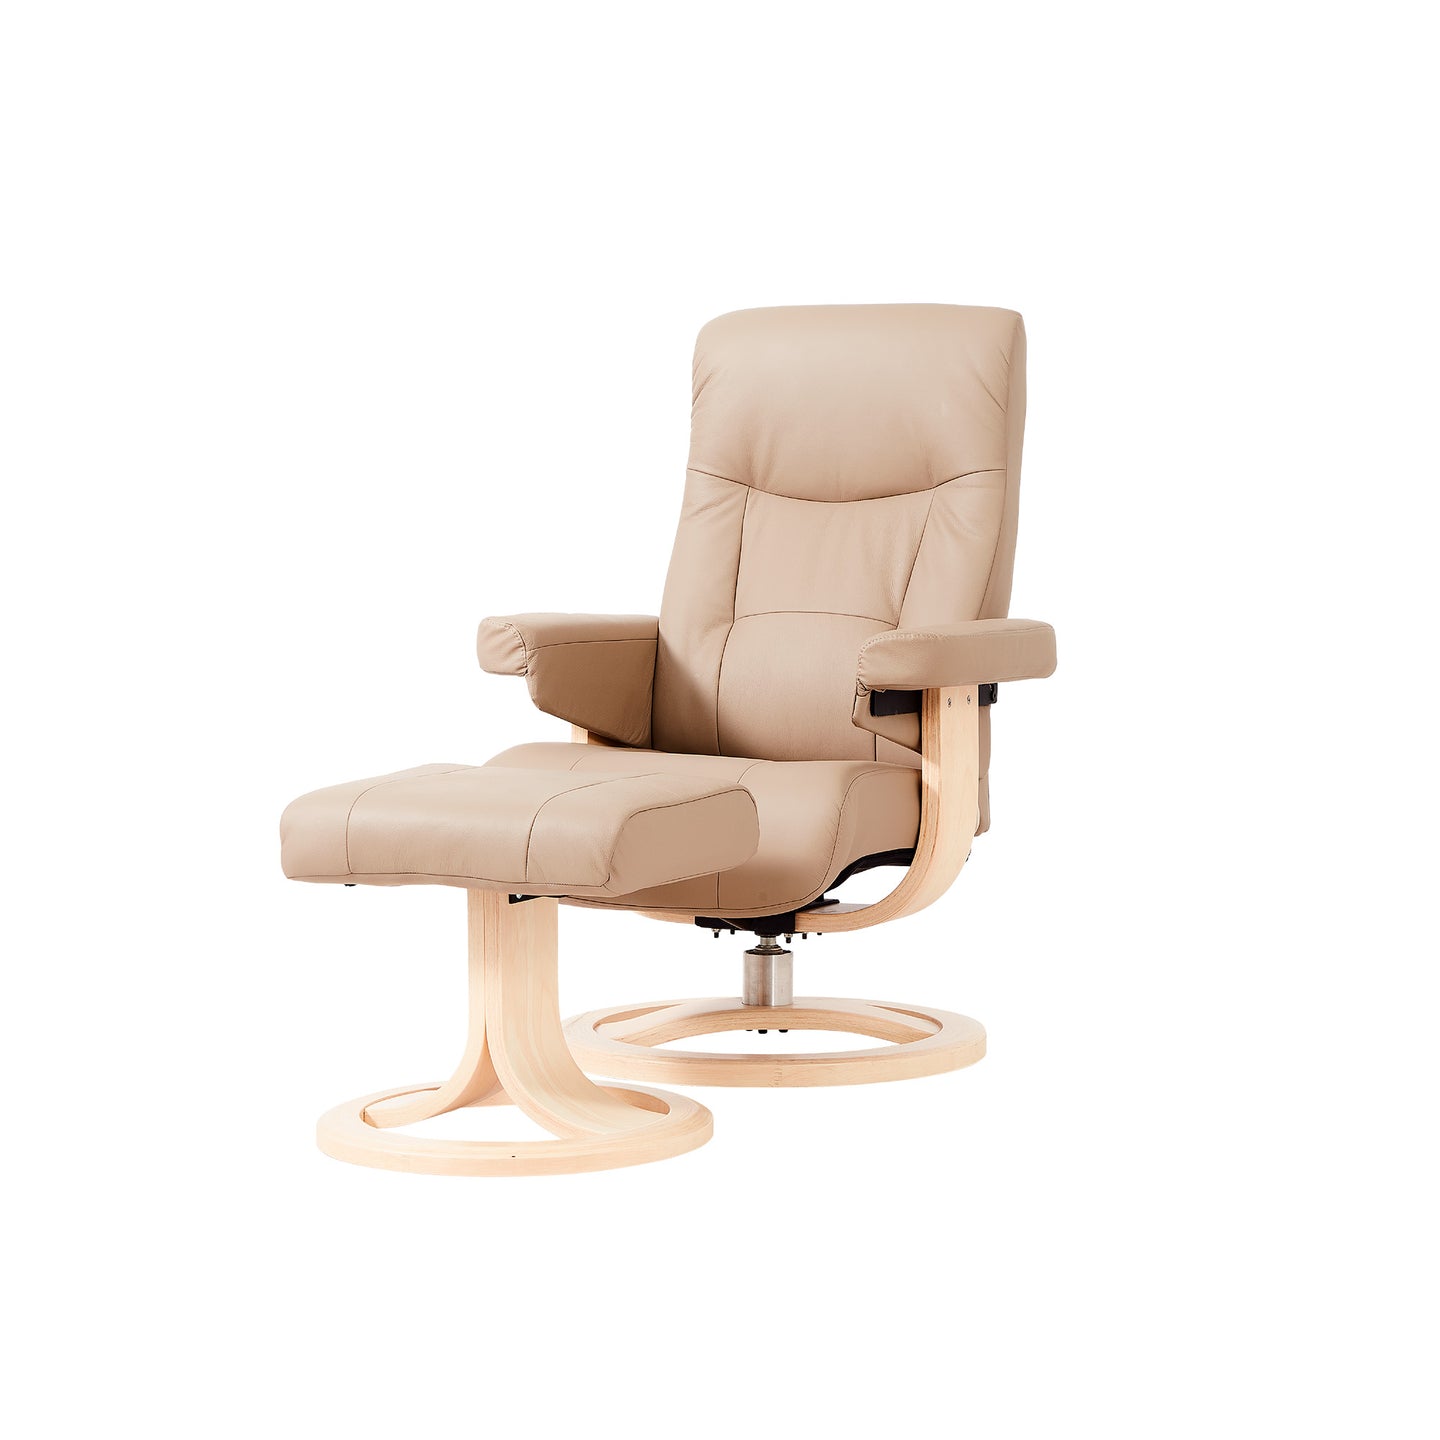 This recliner boasts a luxuriously comfortable seat and back cushion, complemented by its rounded backrest which adapts to your body to ensure exceptional support. Boasting a sleek design and slim fit, this ergonomic leather lounge chair is ideal for bedrooms, living rooms, and all other interior spaces. Bergen lounge chair is designed with 360-degree swivel function and matching footstool, with a selection of four genuine bovine leather colors available for you to choose from.